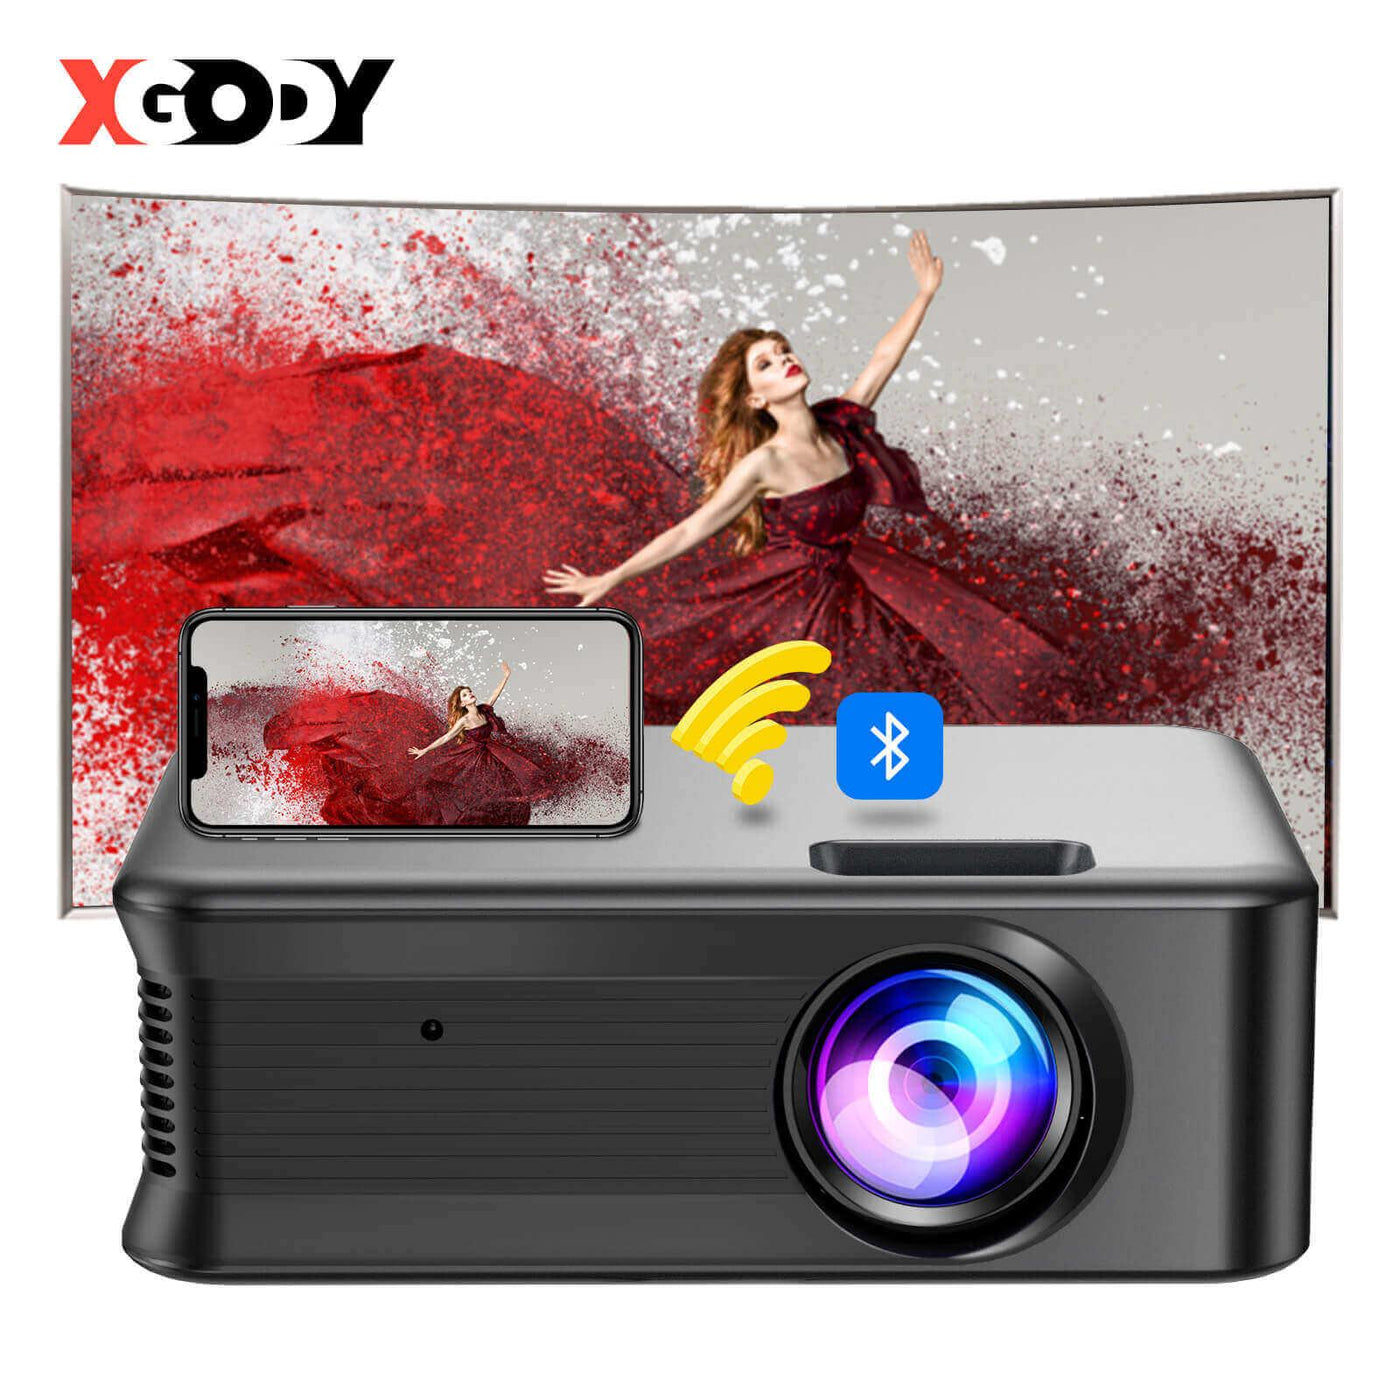 XGODY Mini Video Projector 1080P, Wireless Bluetooth and WiFi Projection